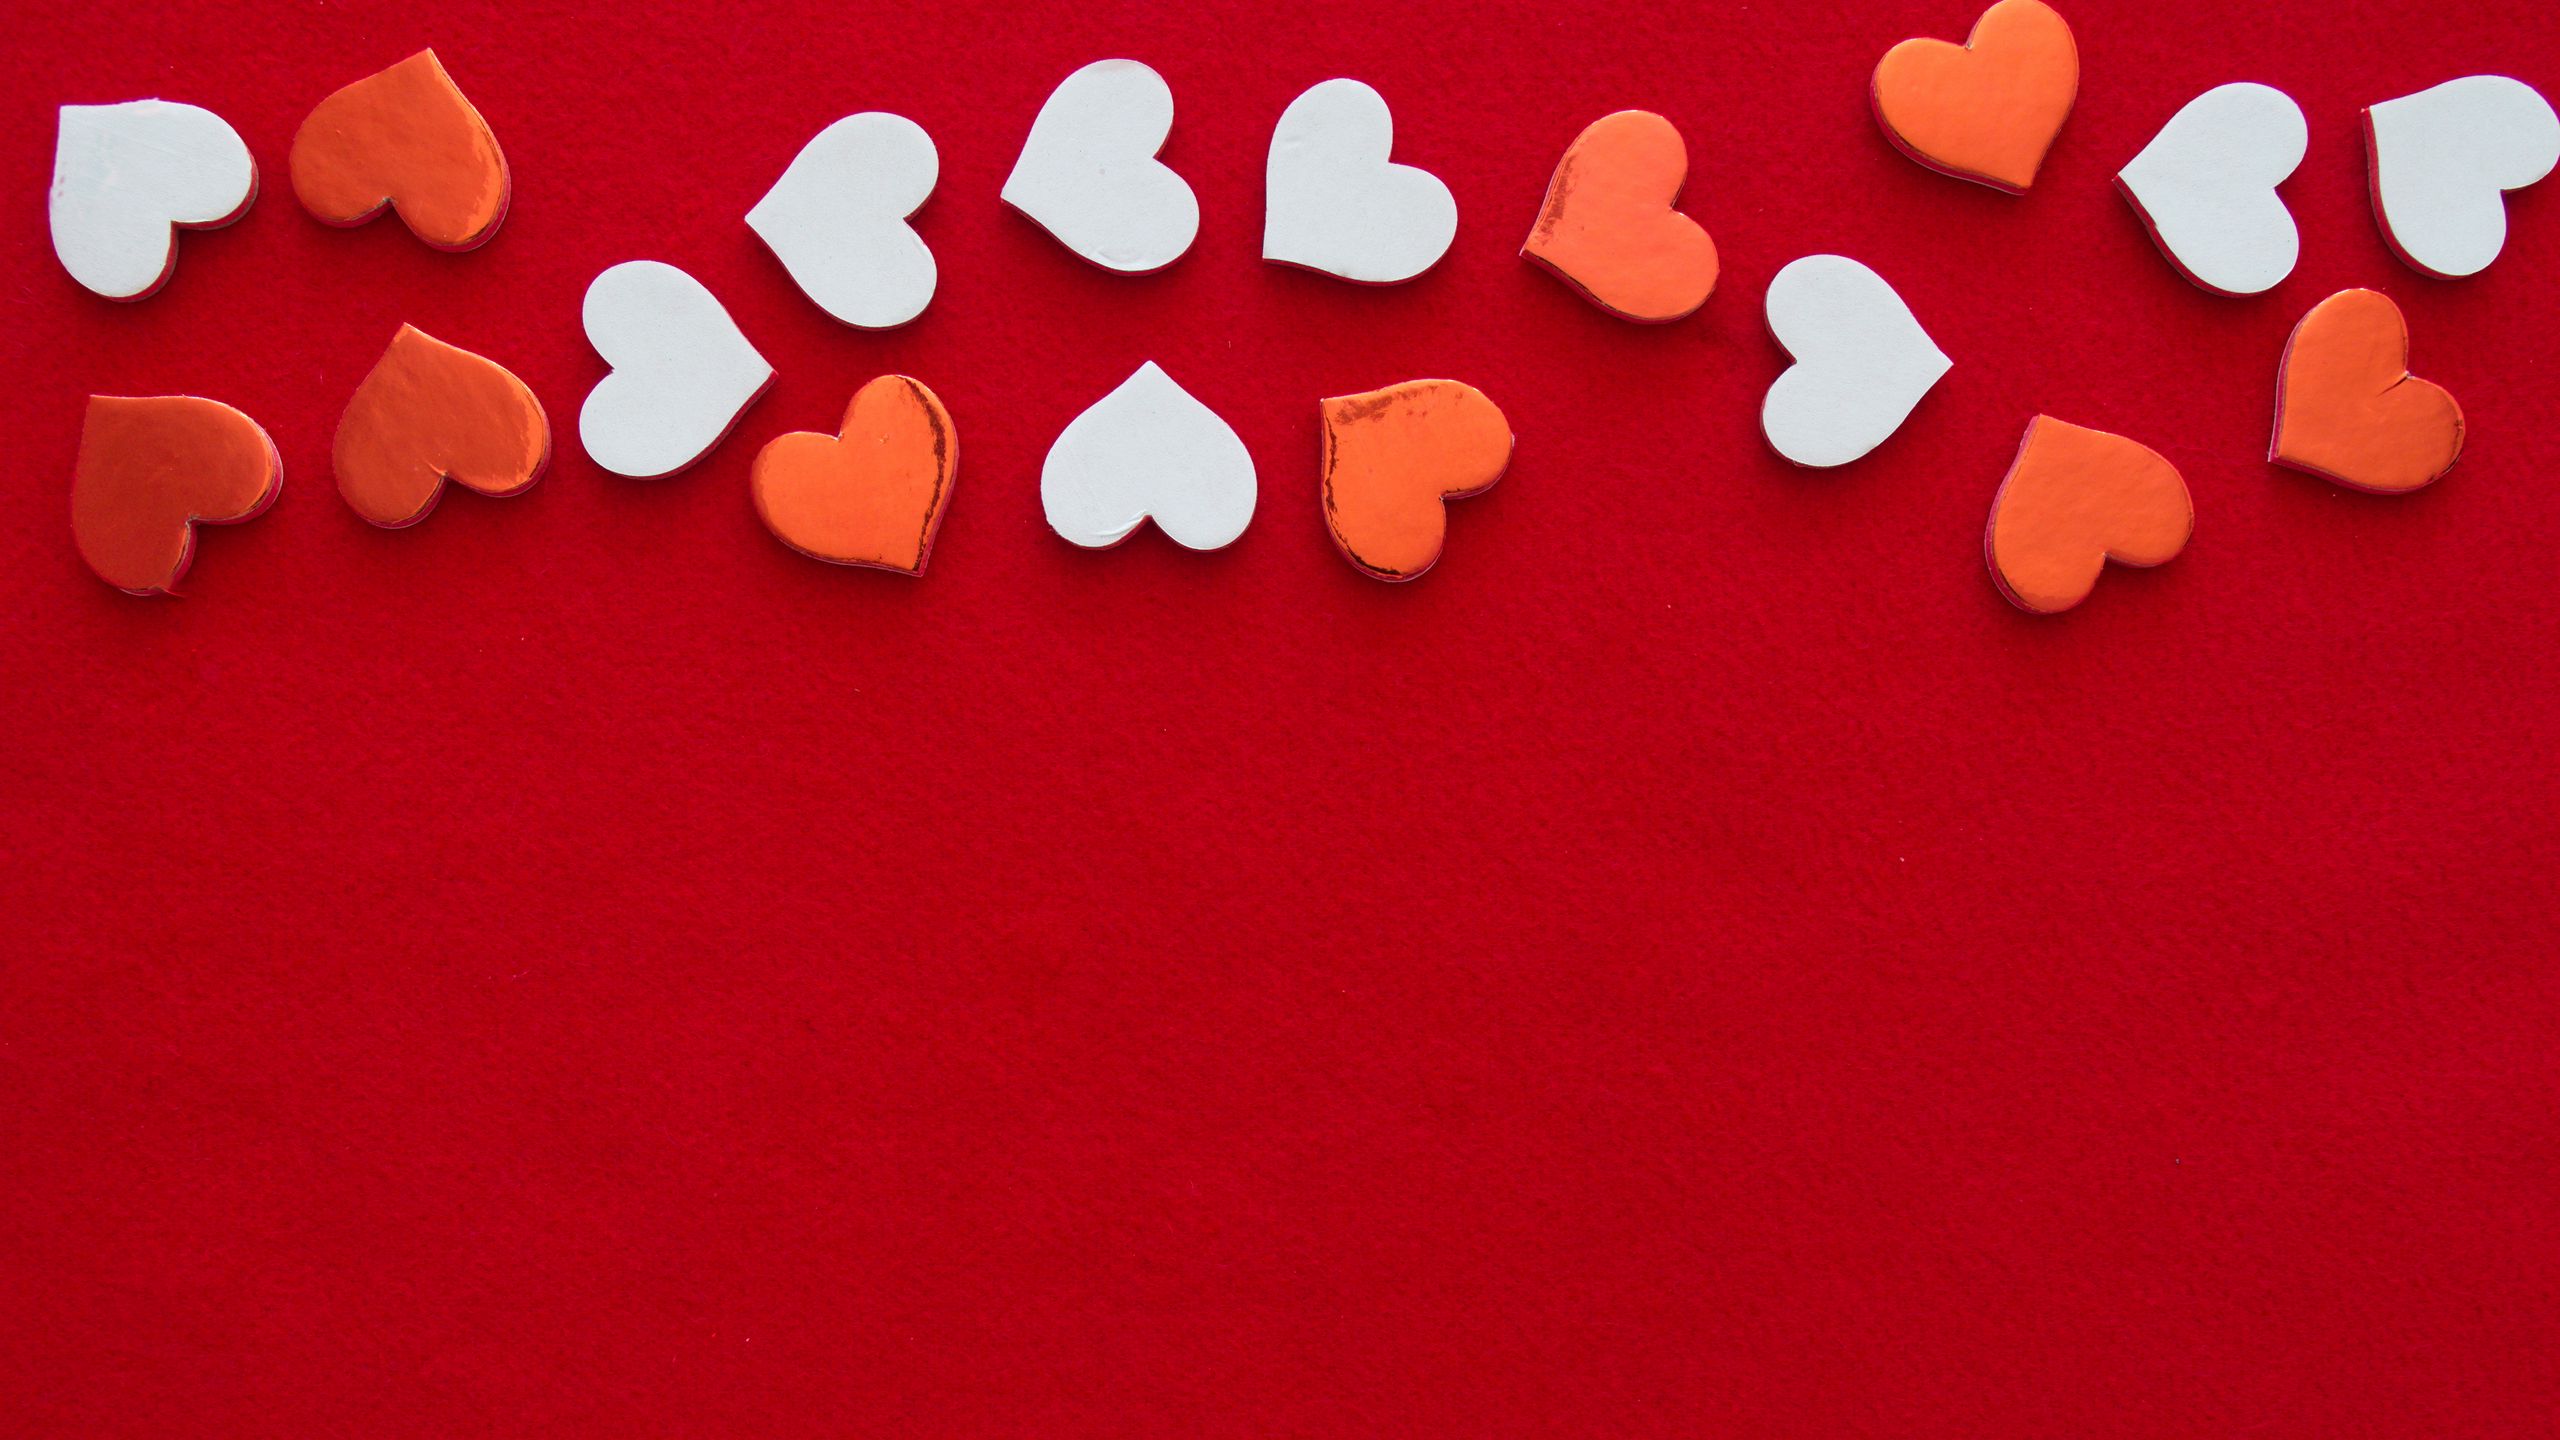 2560x1440 Wallpaper hearts, love, background, white, red